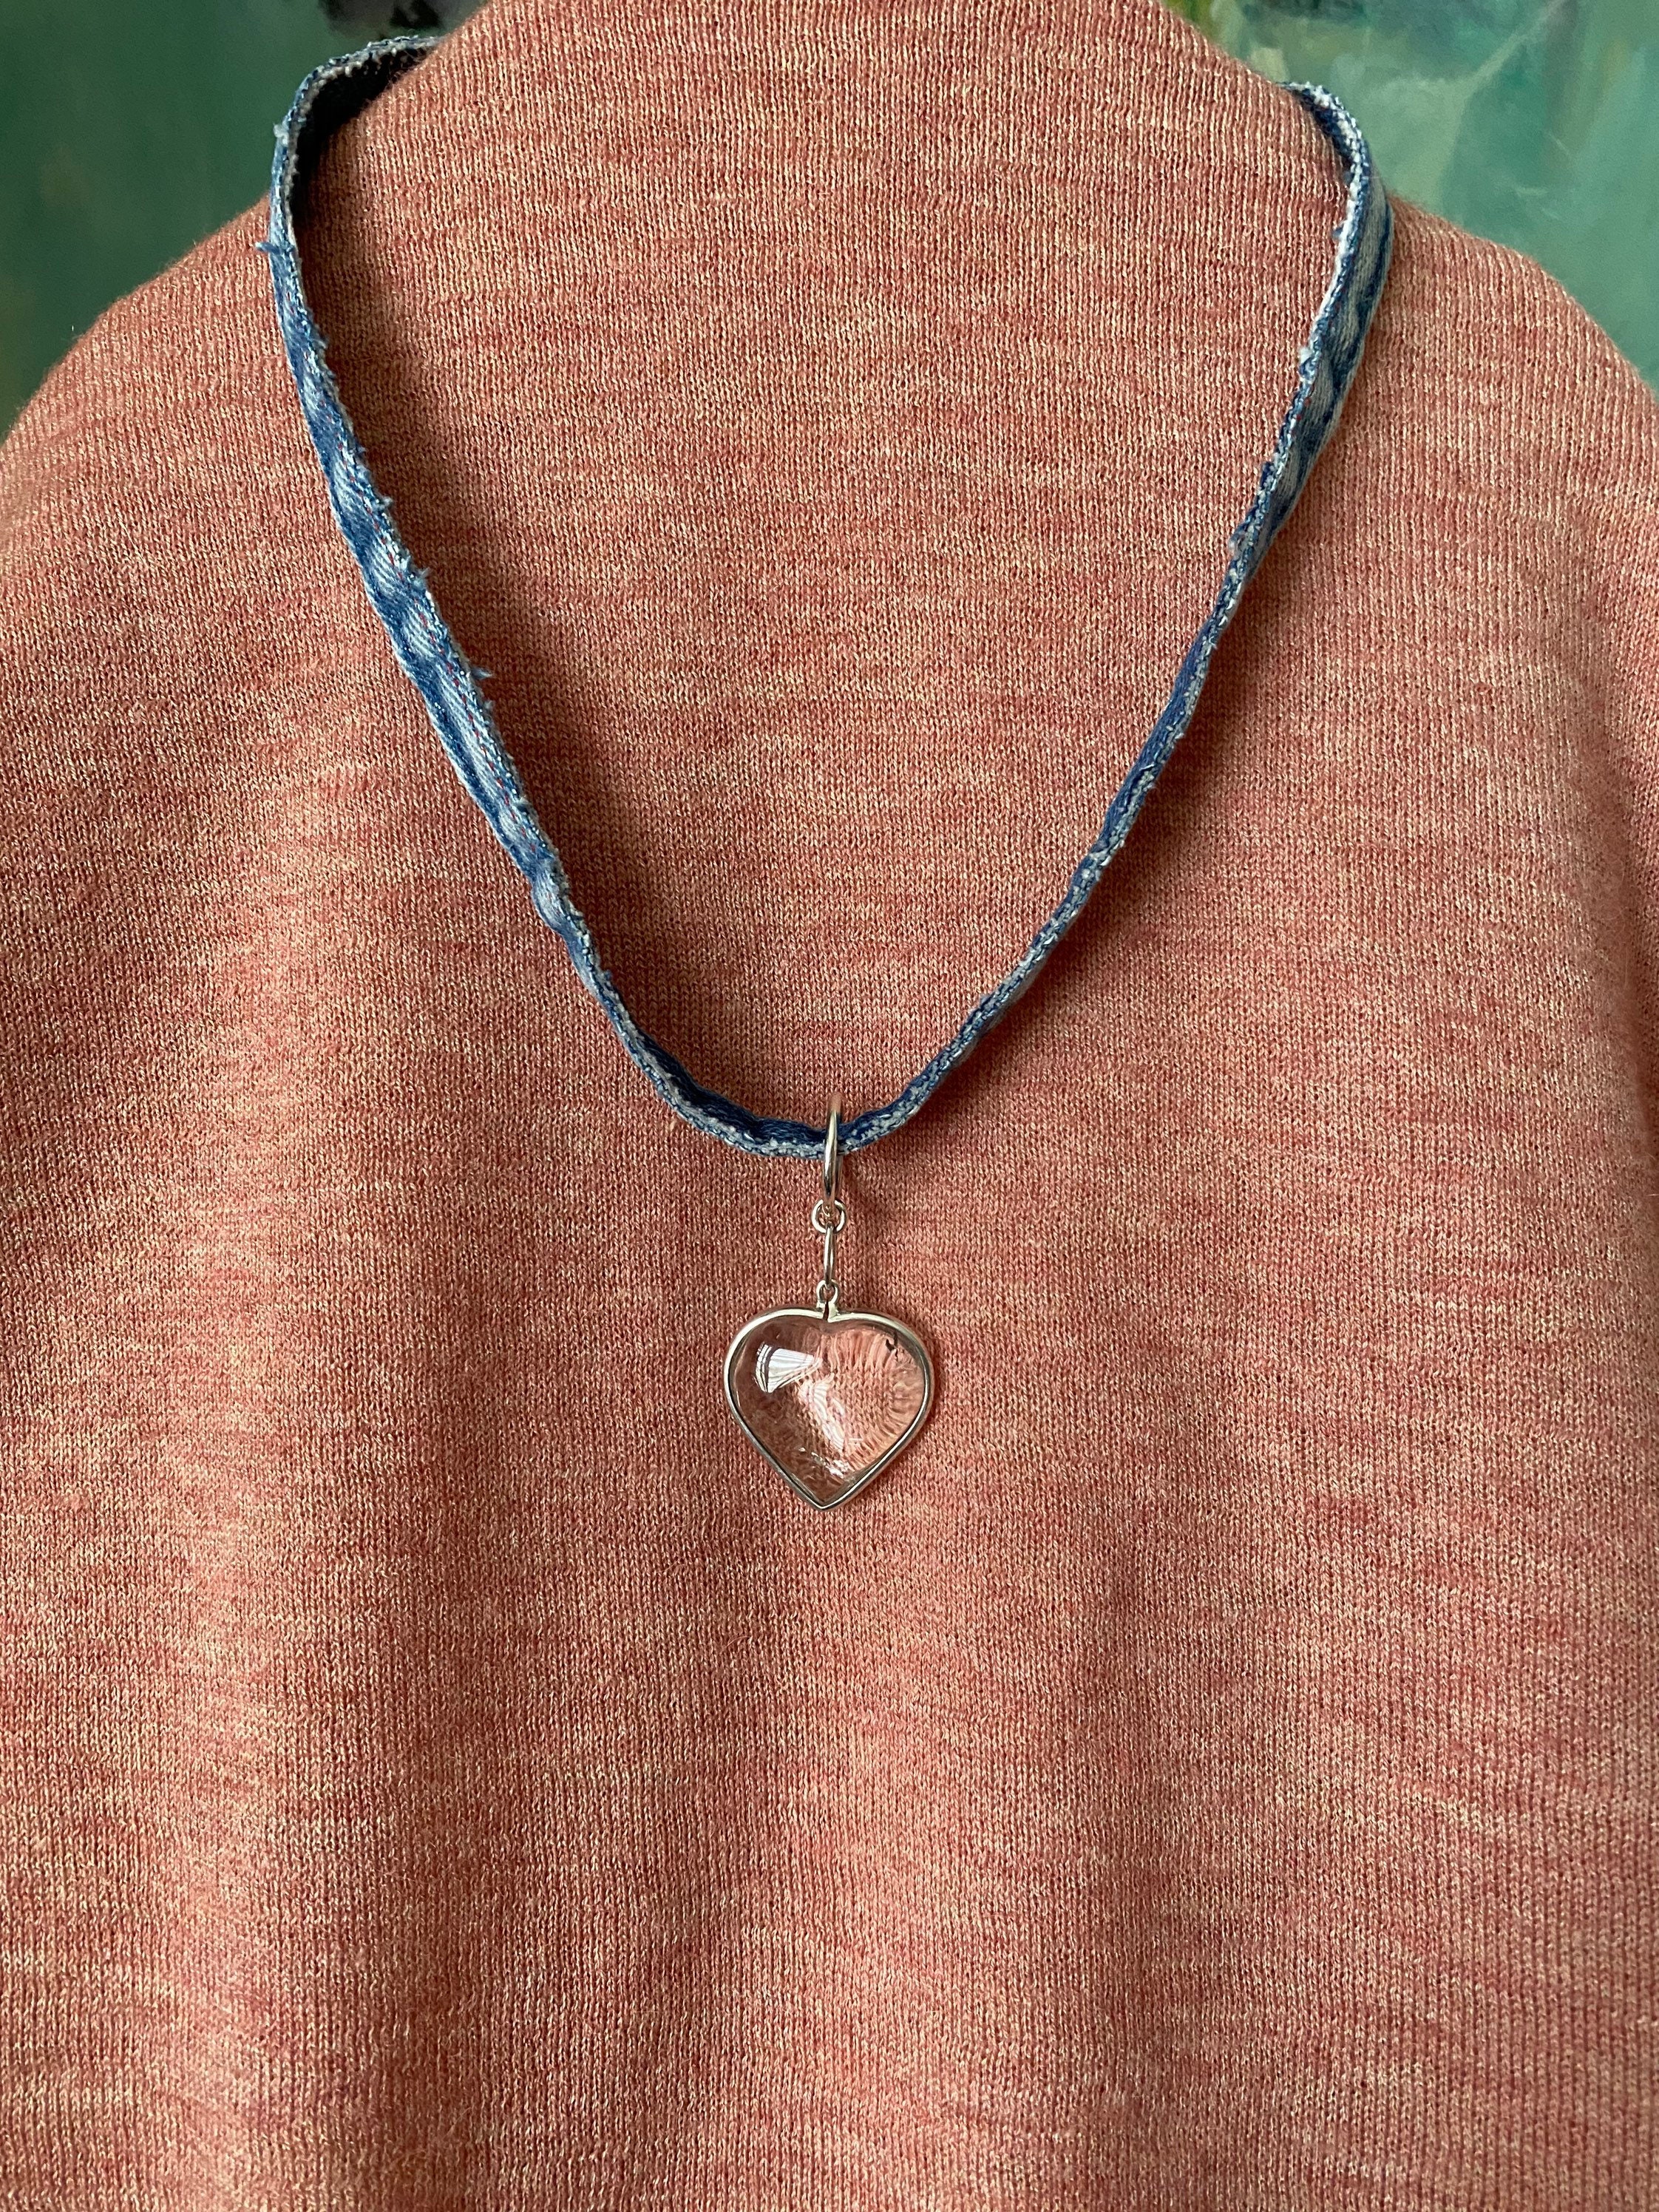 Heart Rock Necklace // Beach Rock Jewelry // Carved Stone Necklace // Gift  Under 50 // Made in Usa-shop Local // BEST SELLER 